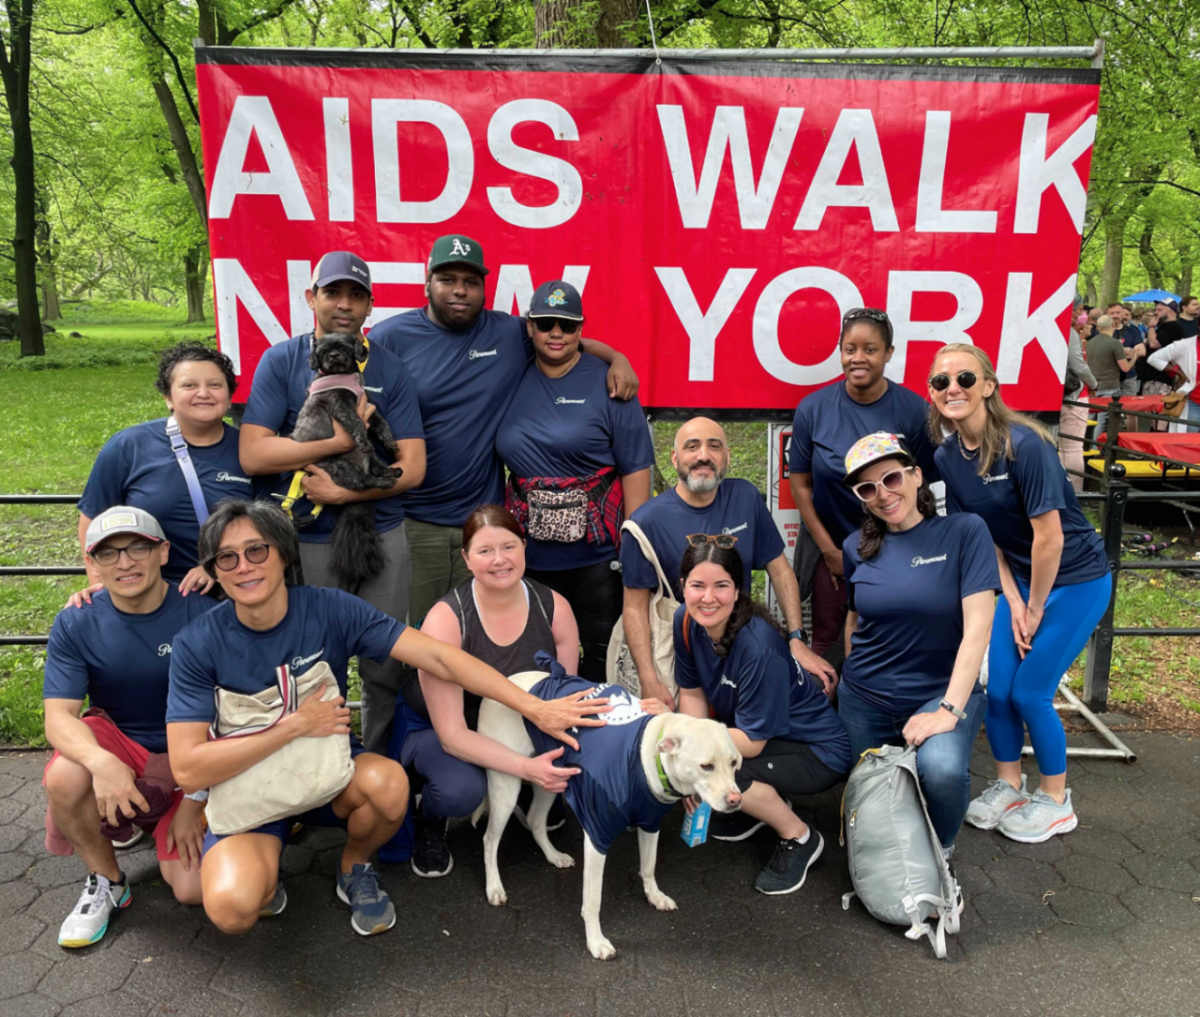 A group of people, some sitting in front of others standing. Two dogs in front getting pet. All wearing matching t-shirts (even the good dog). "AIDS WALK NEW YORK" on a banner behind them.